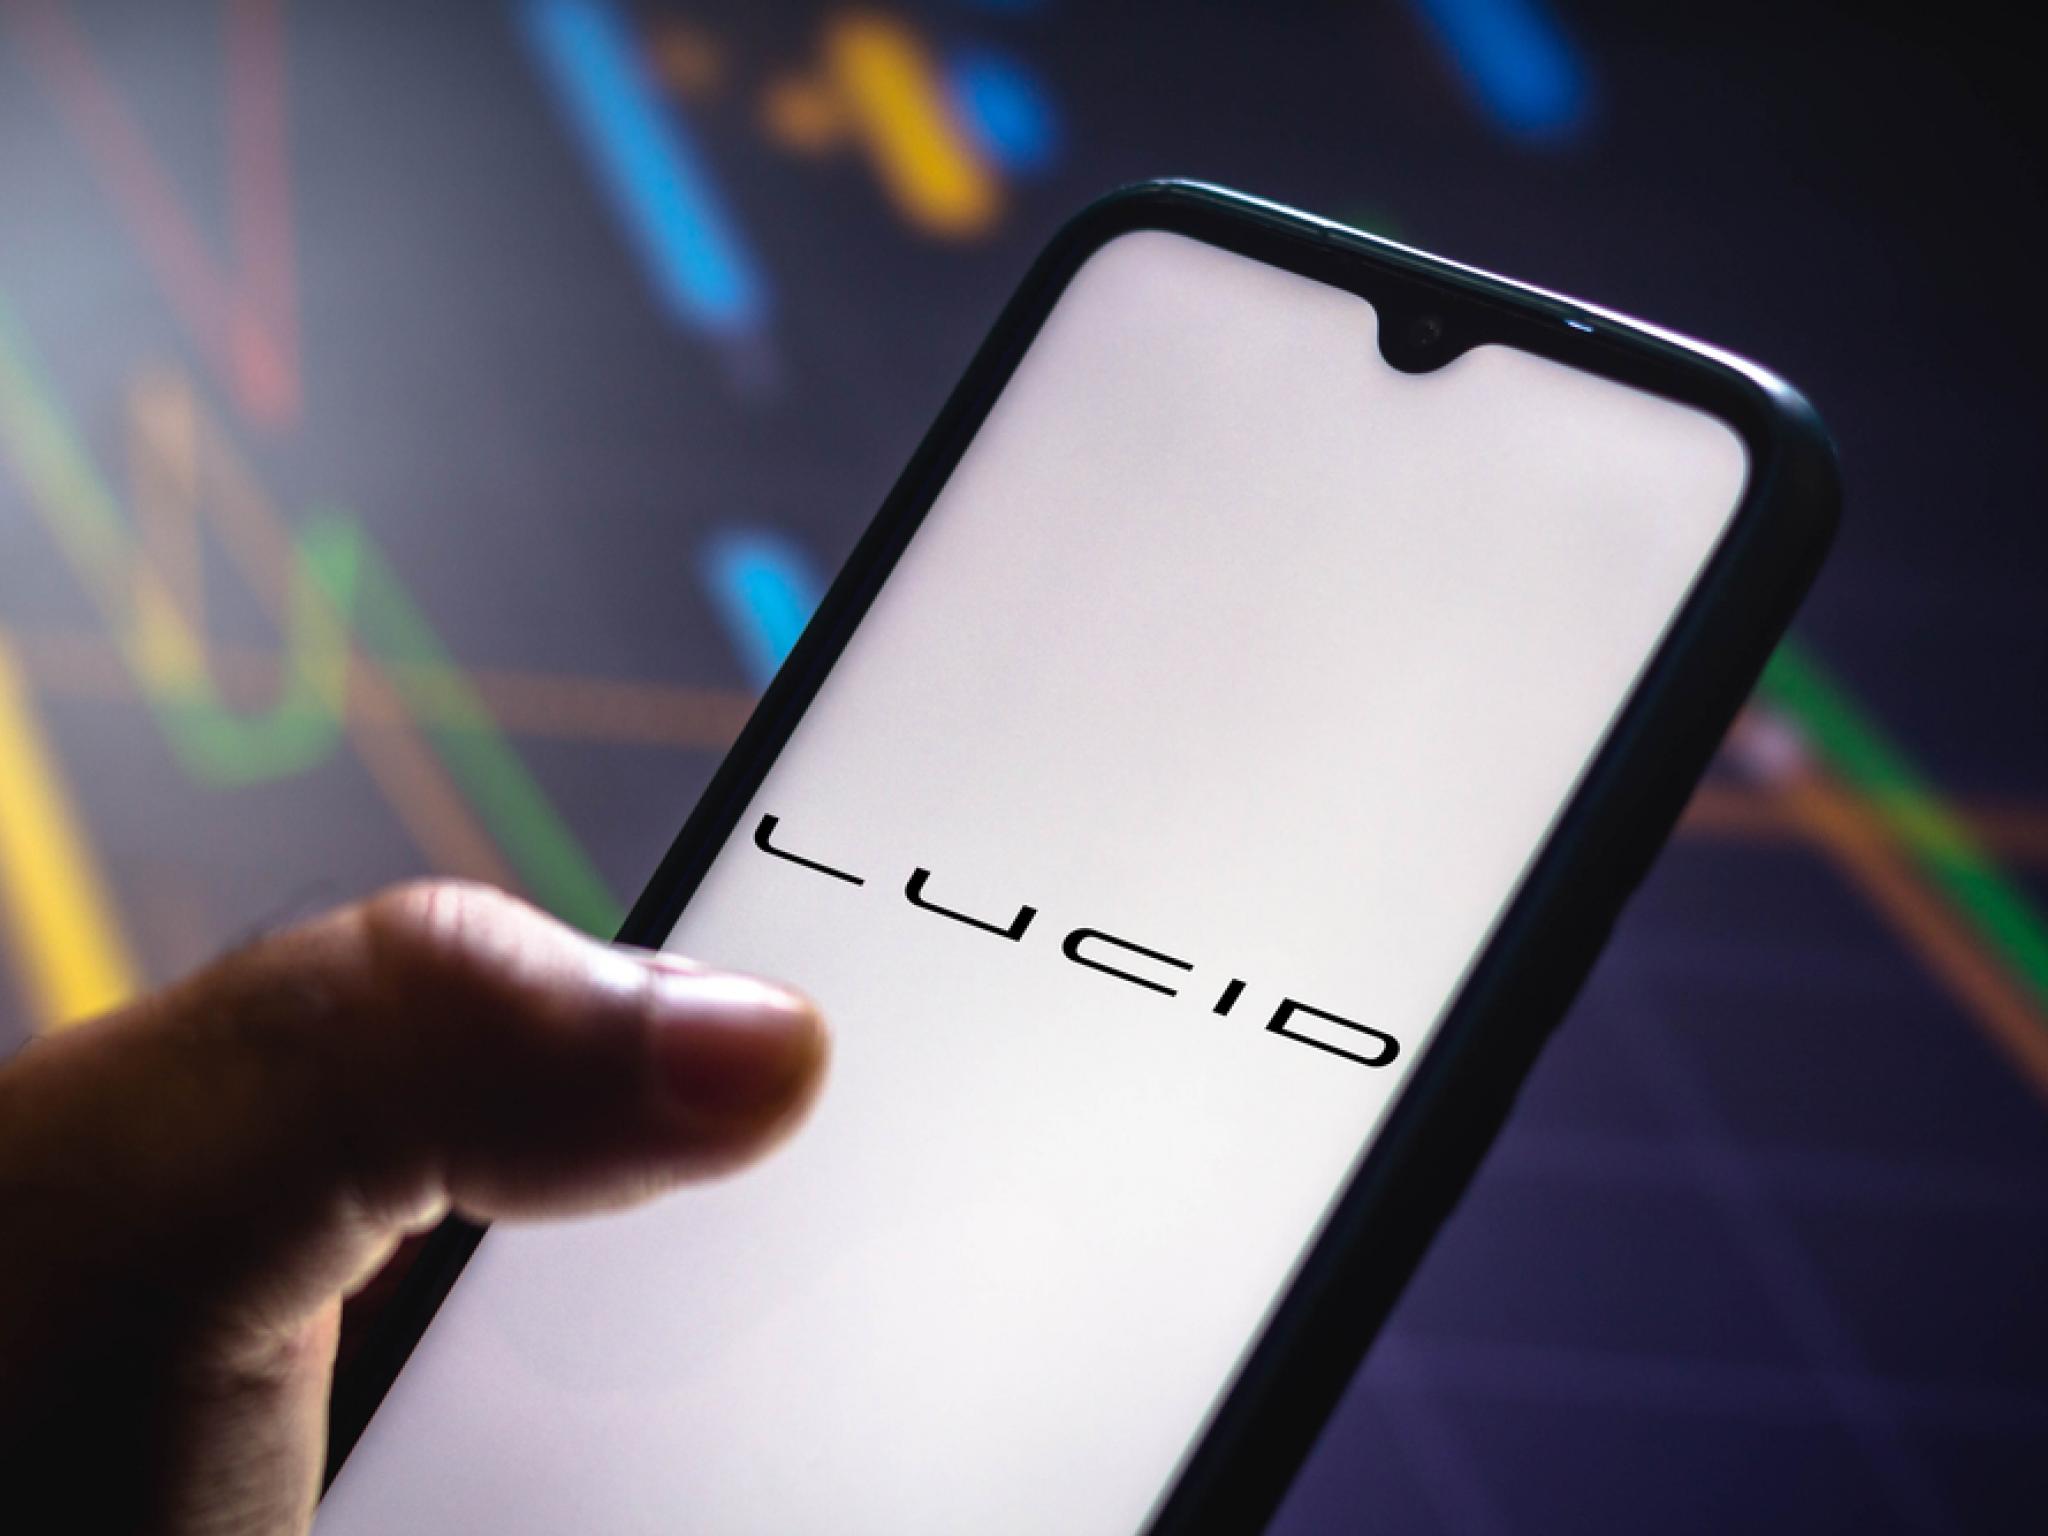  lucid-stock-gains-3-premarket-after-ev-maker-announces-6-workforce-reduction-cutting-400-jobs-to-lower-costs 